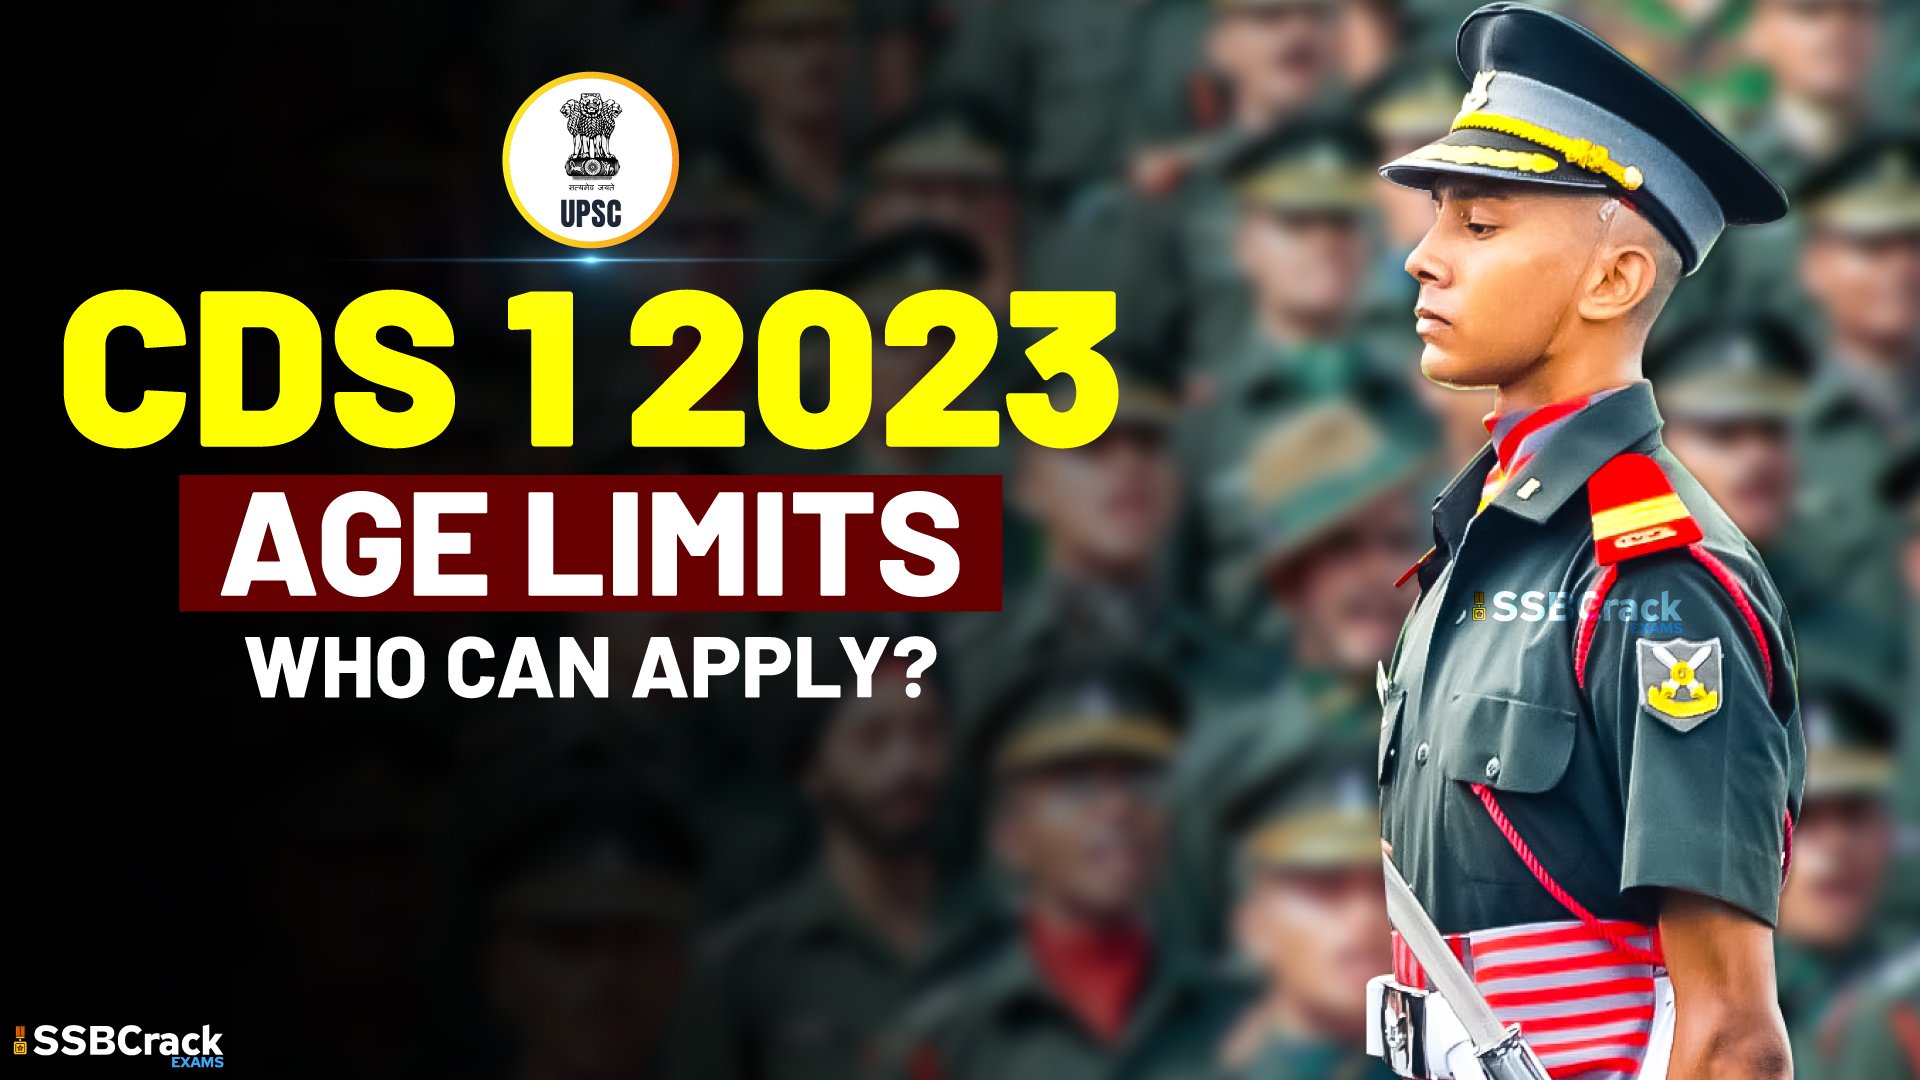 CDS Exam 2023 Age Limits Who Can Apply For CDS 1 2023